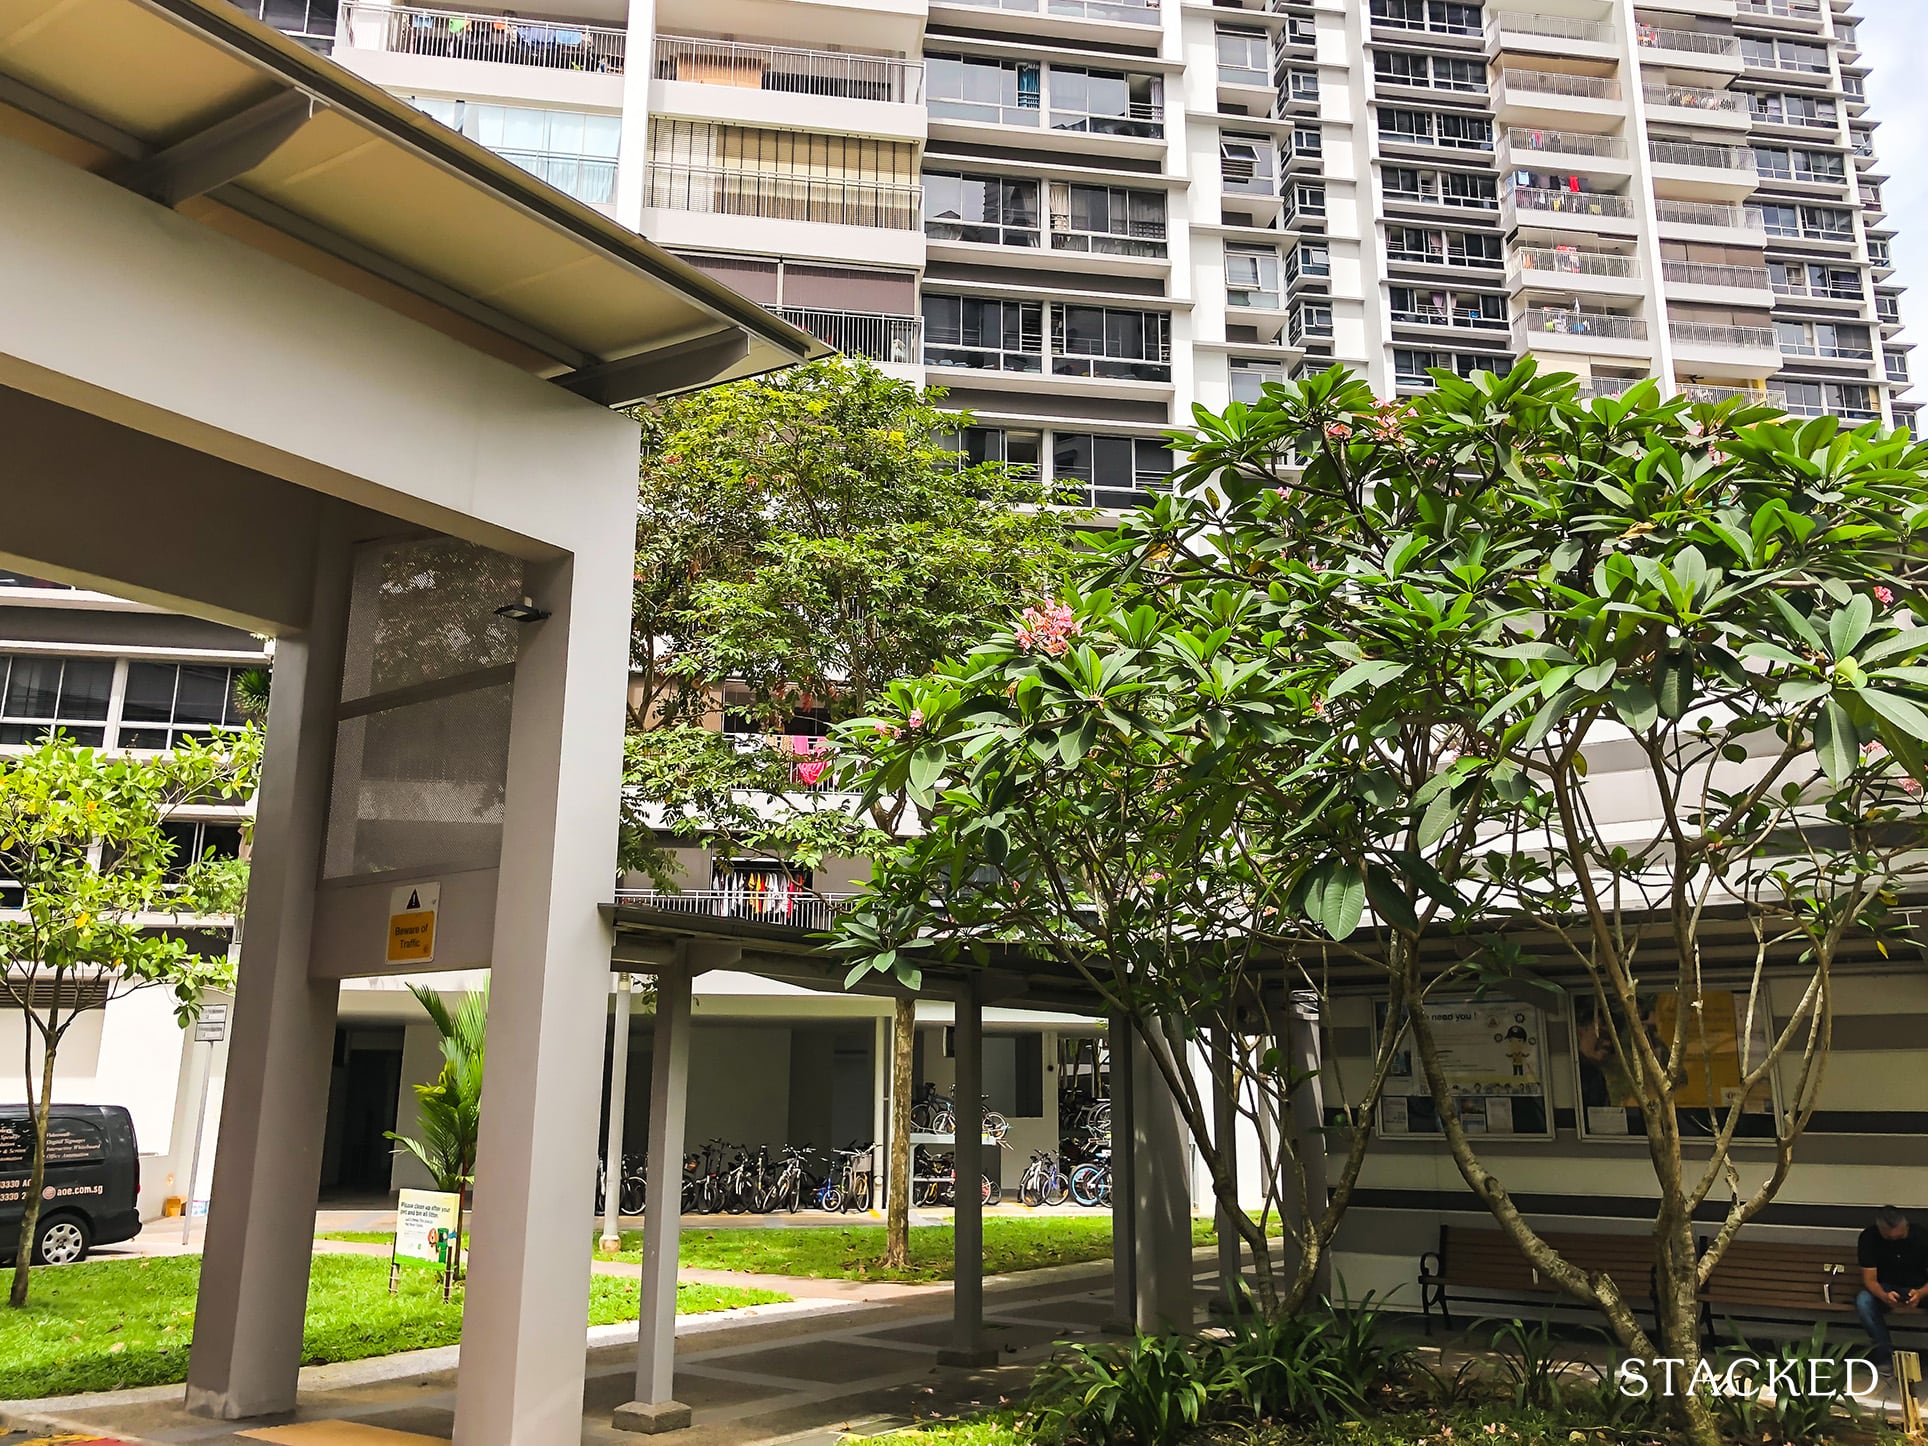 The Peak @ Toa Payoh sheltered walkway